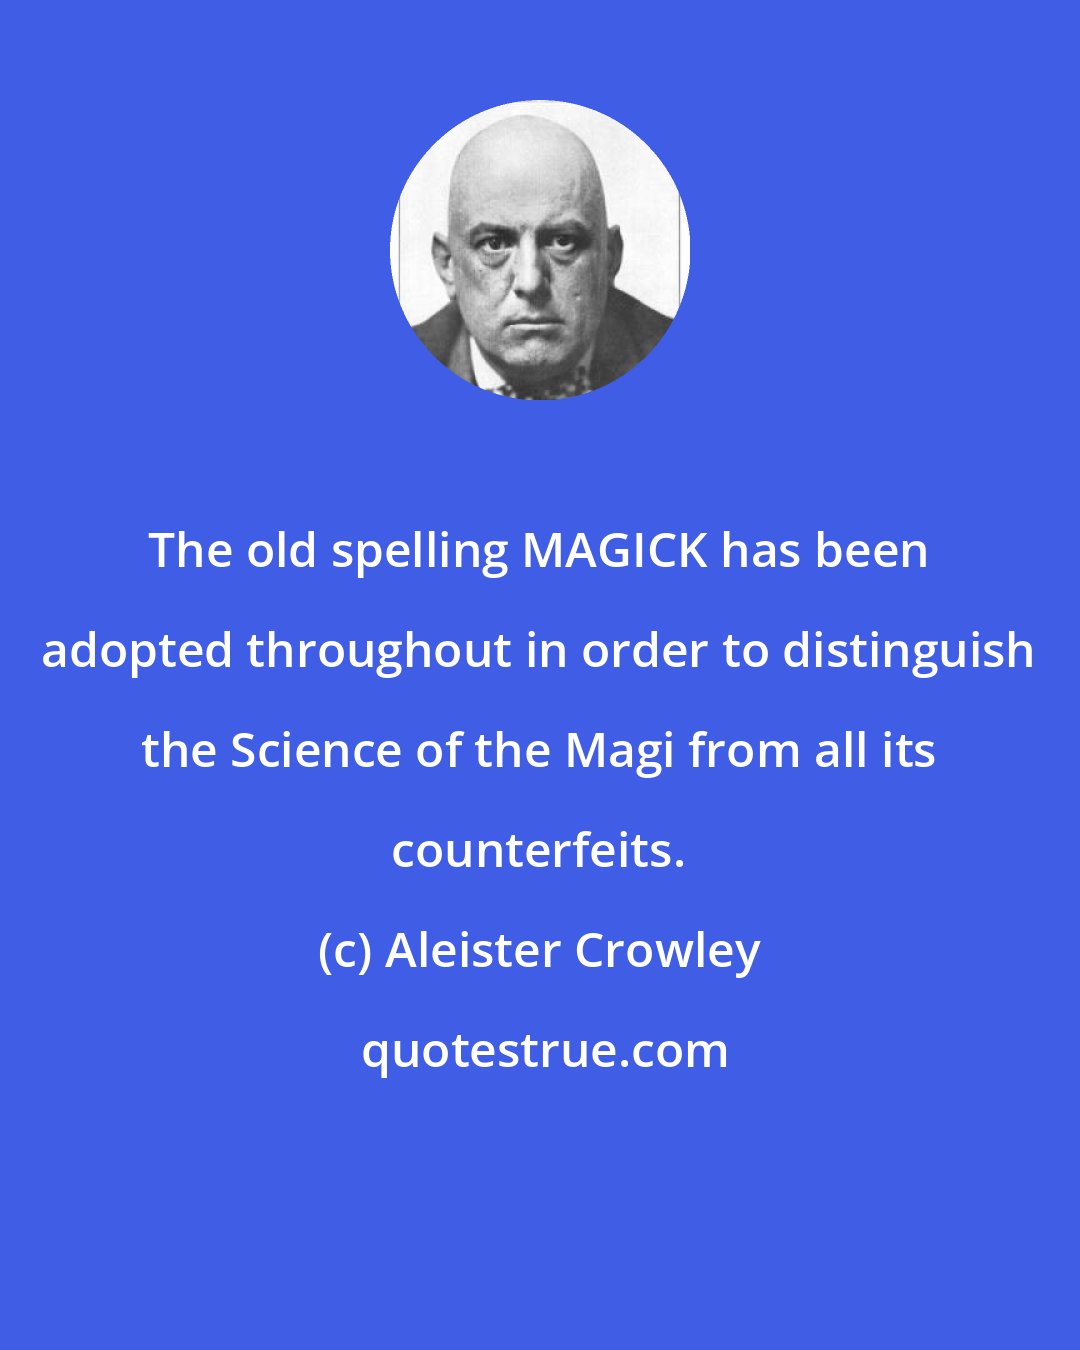 Aleister Crowley: The old spelling MAGICK has been adopted throughout in order to distinguish the Science of the Magi from all its counterfeits.